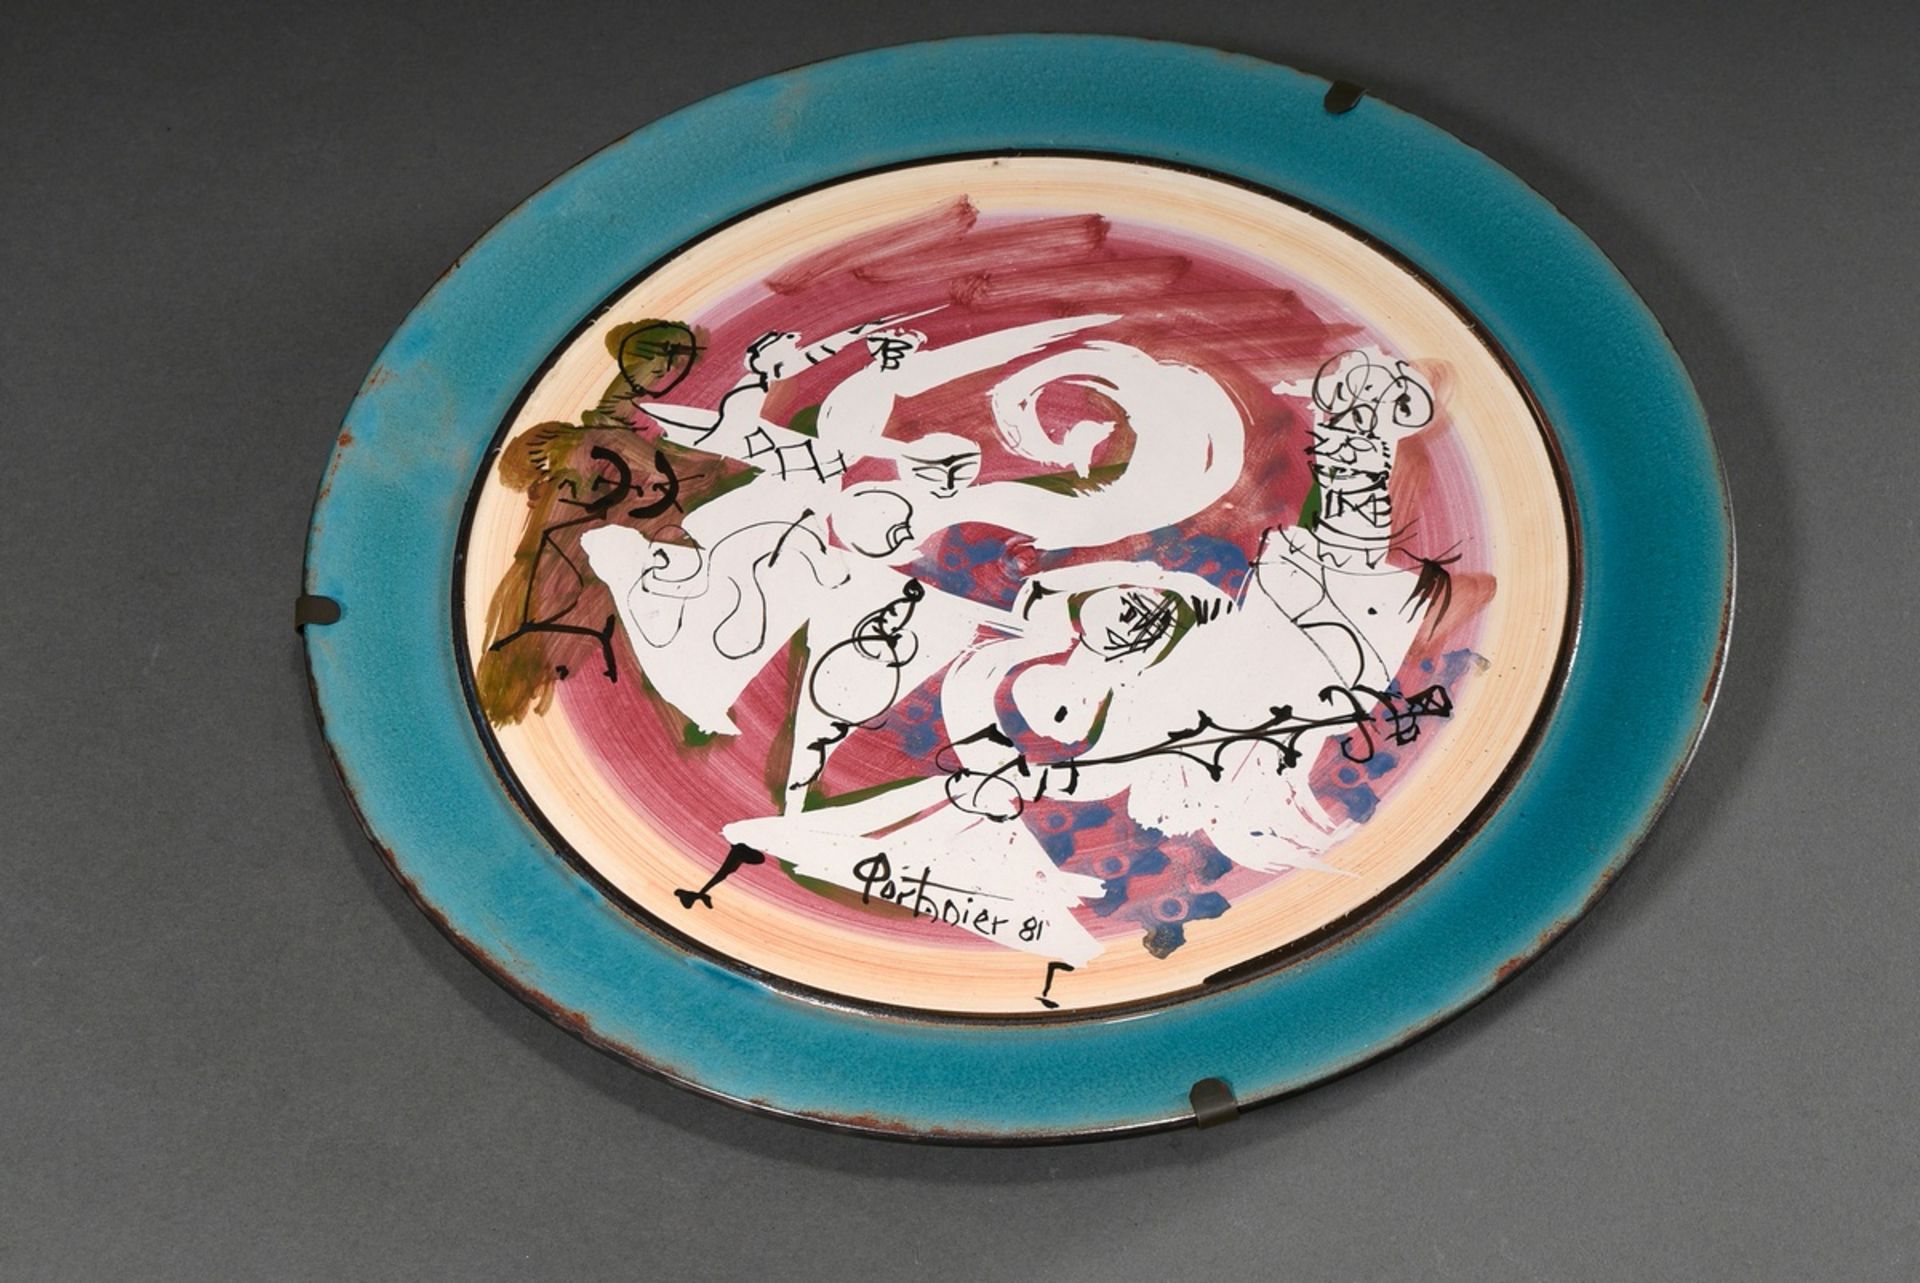 Large studio ceramic plate by Gilbert Portanier, Vallauris, abstract figural representation, signed - Image 2 of 4